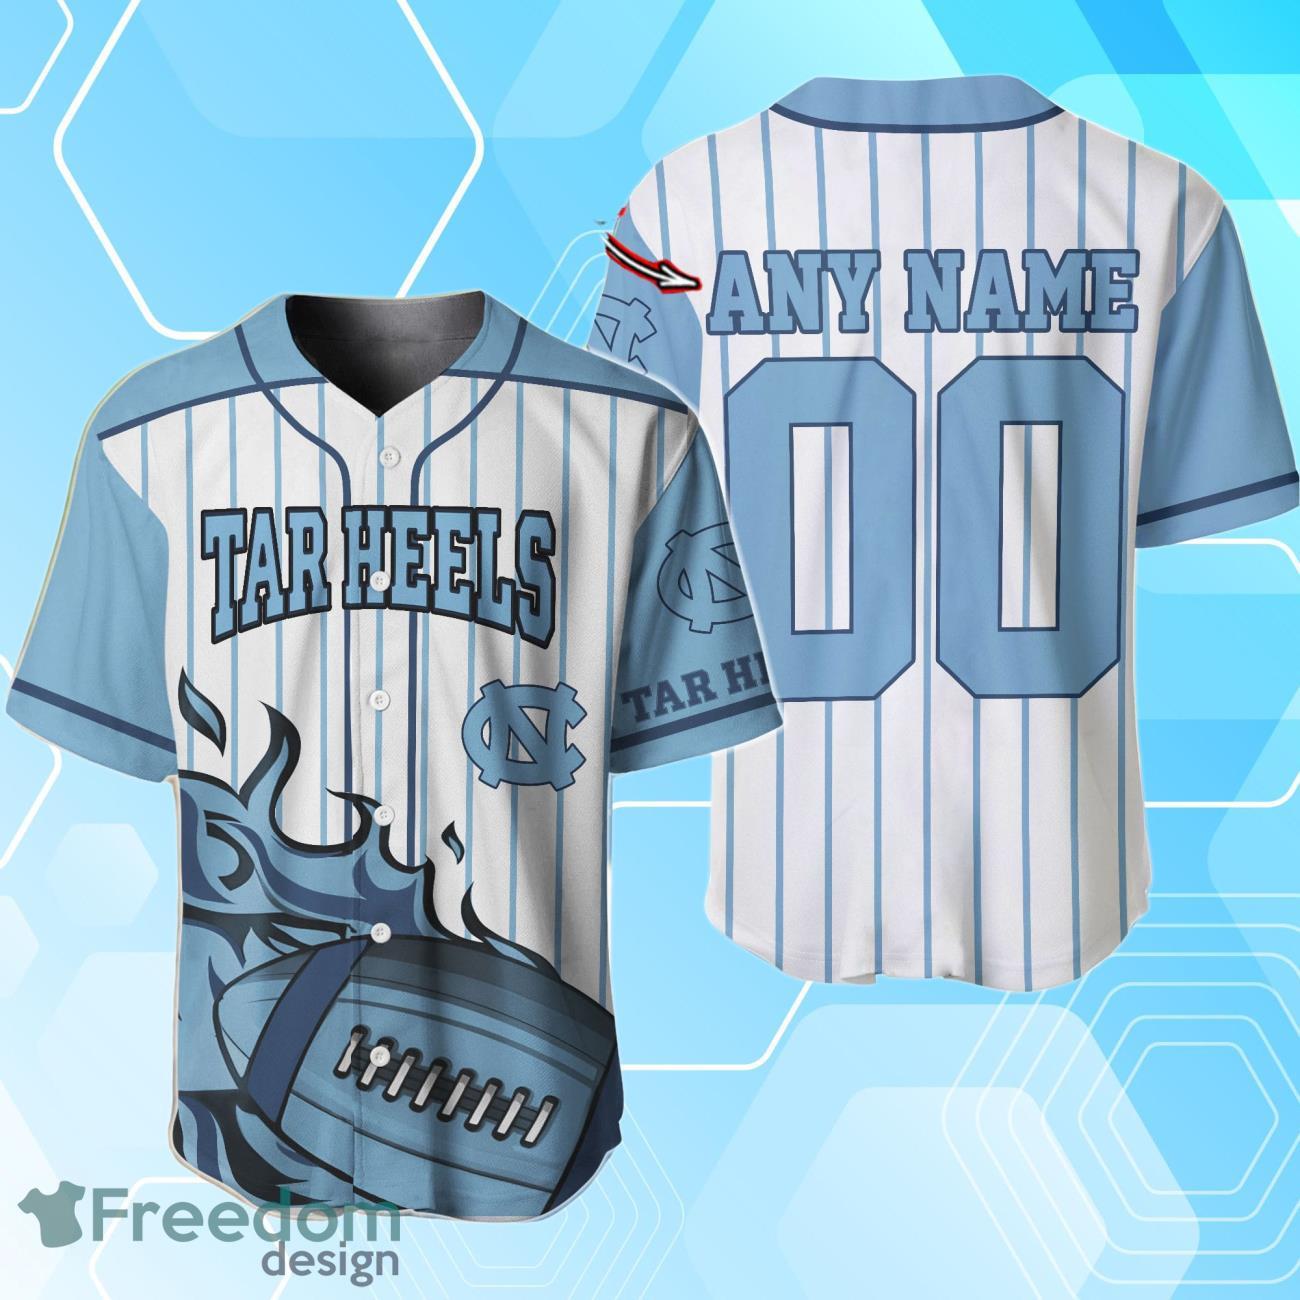 Chicago White Sox Peanuts Snoopy Jersey Baseball Shirt White Custom Number  And Name - Banantees